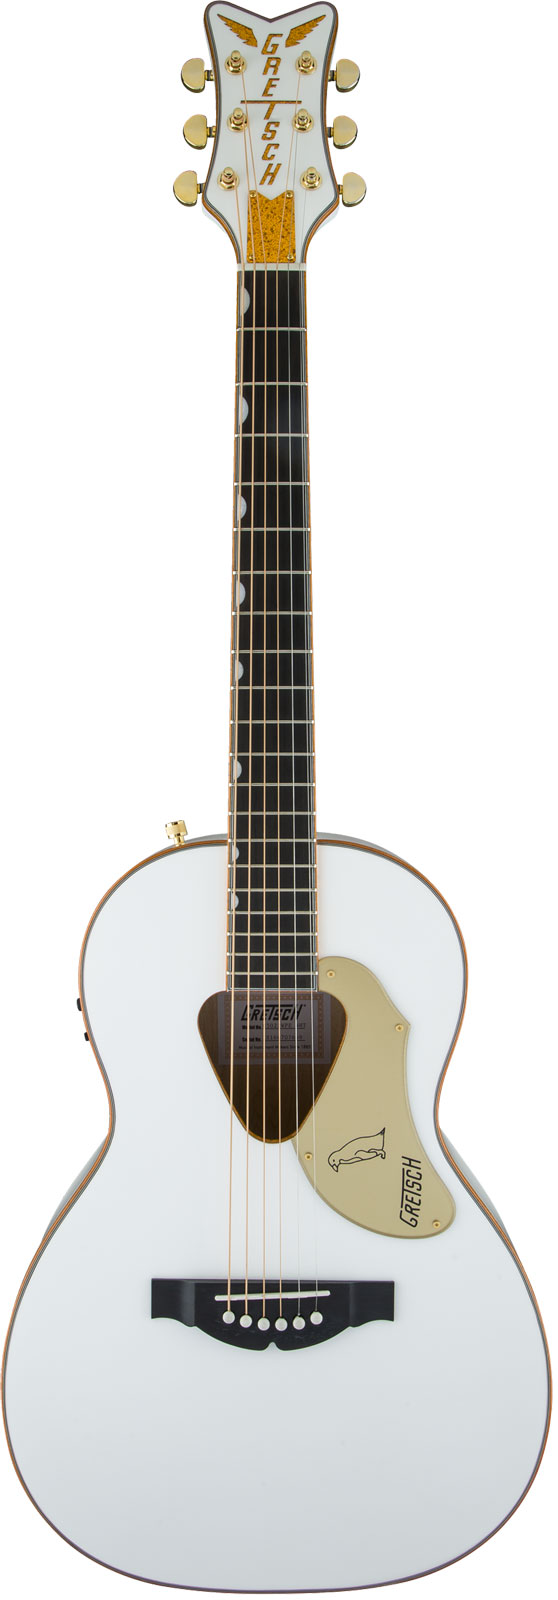 GRETSCH GUITARS G5021WPE RANCHER PENGUIN PARLOR ACOUSTIC-ELECTRIC, FISHMAN PICKUP SYSTEM, WHITE